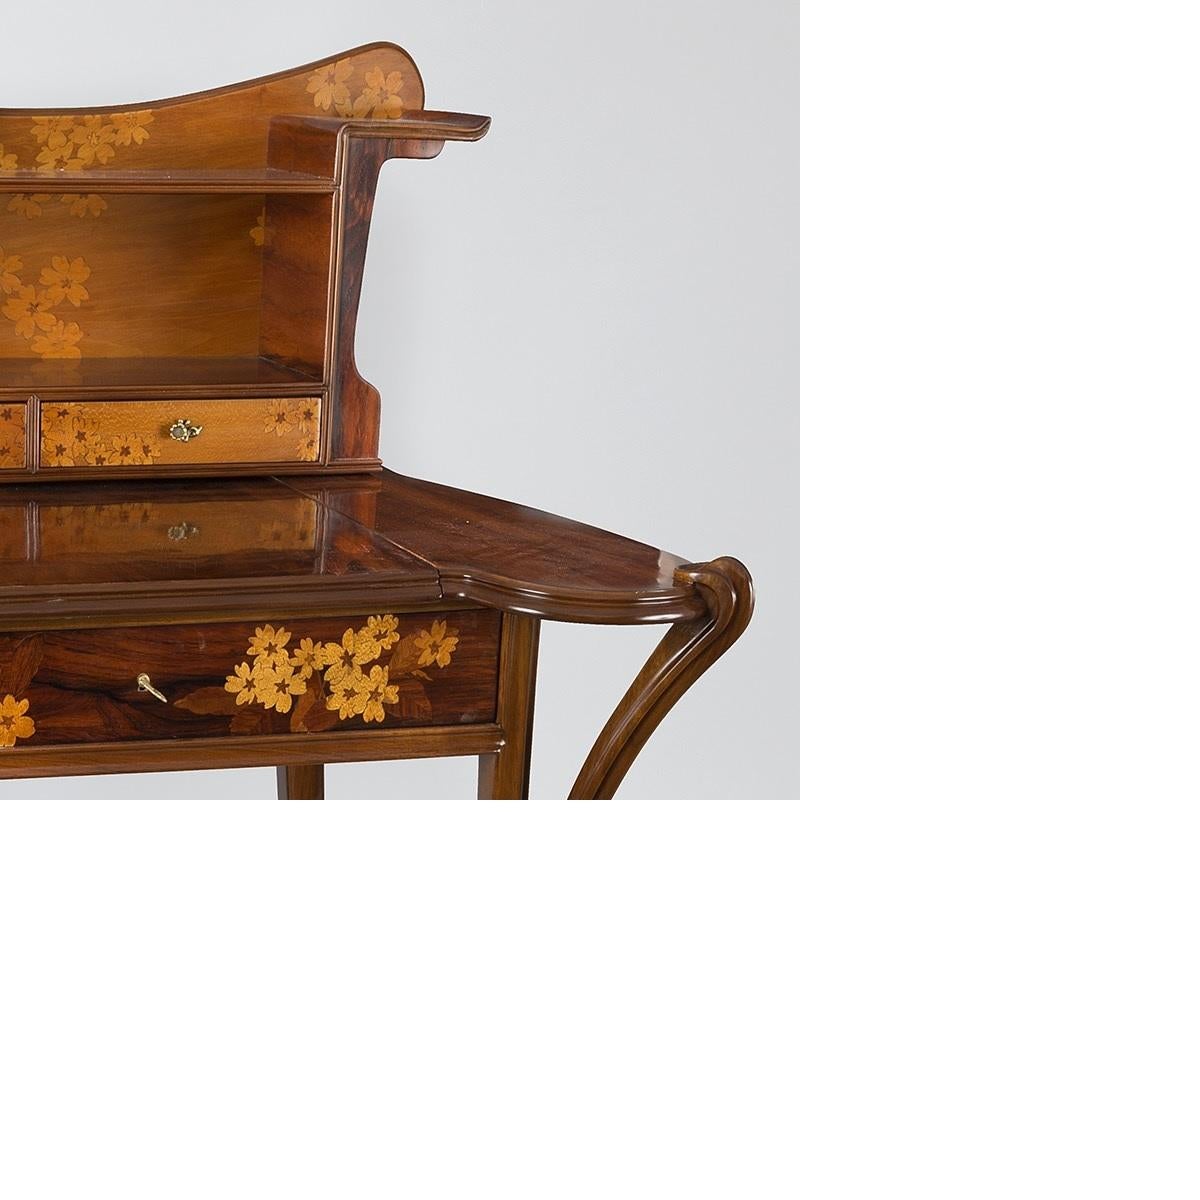 A French Art Nouveau desk in walnut, veneer wood fruit and bronze by Louis Majorelle. The three drawers of the desk are decorated in marquetry with flowers. The same pattern is repeated on the desk's upright piece, which features letter holders on